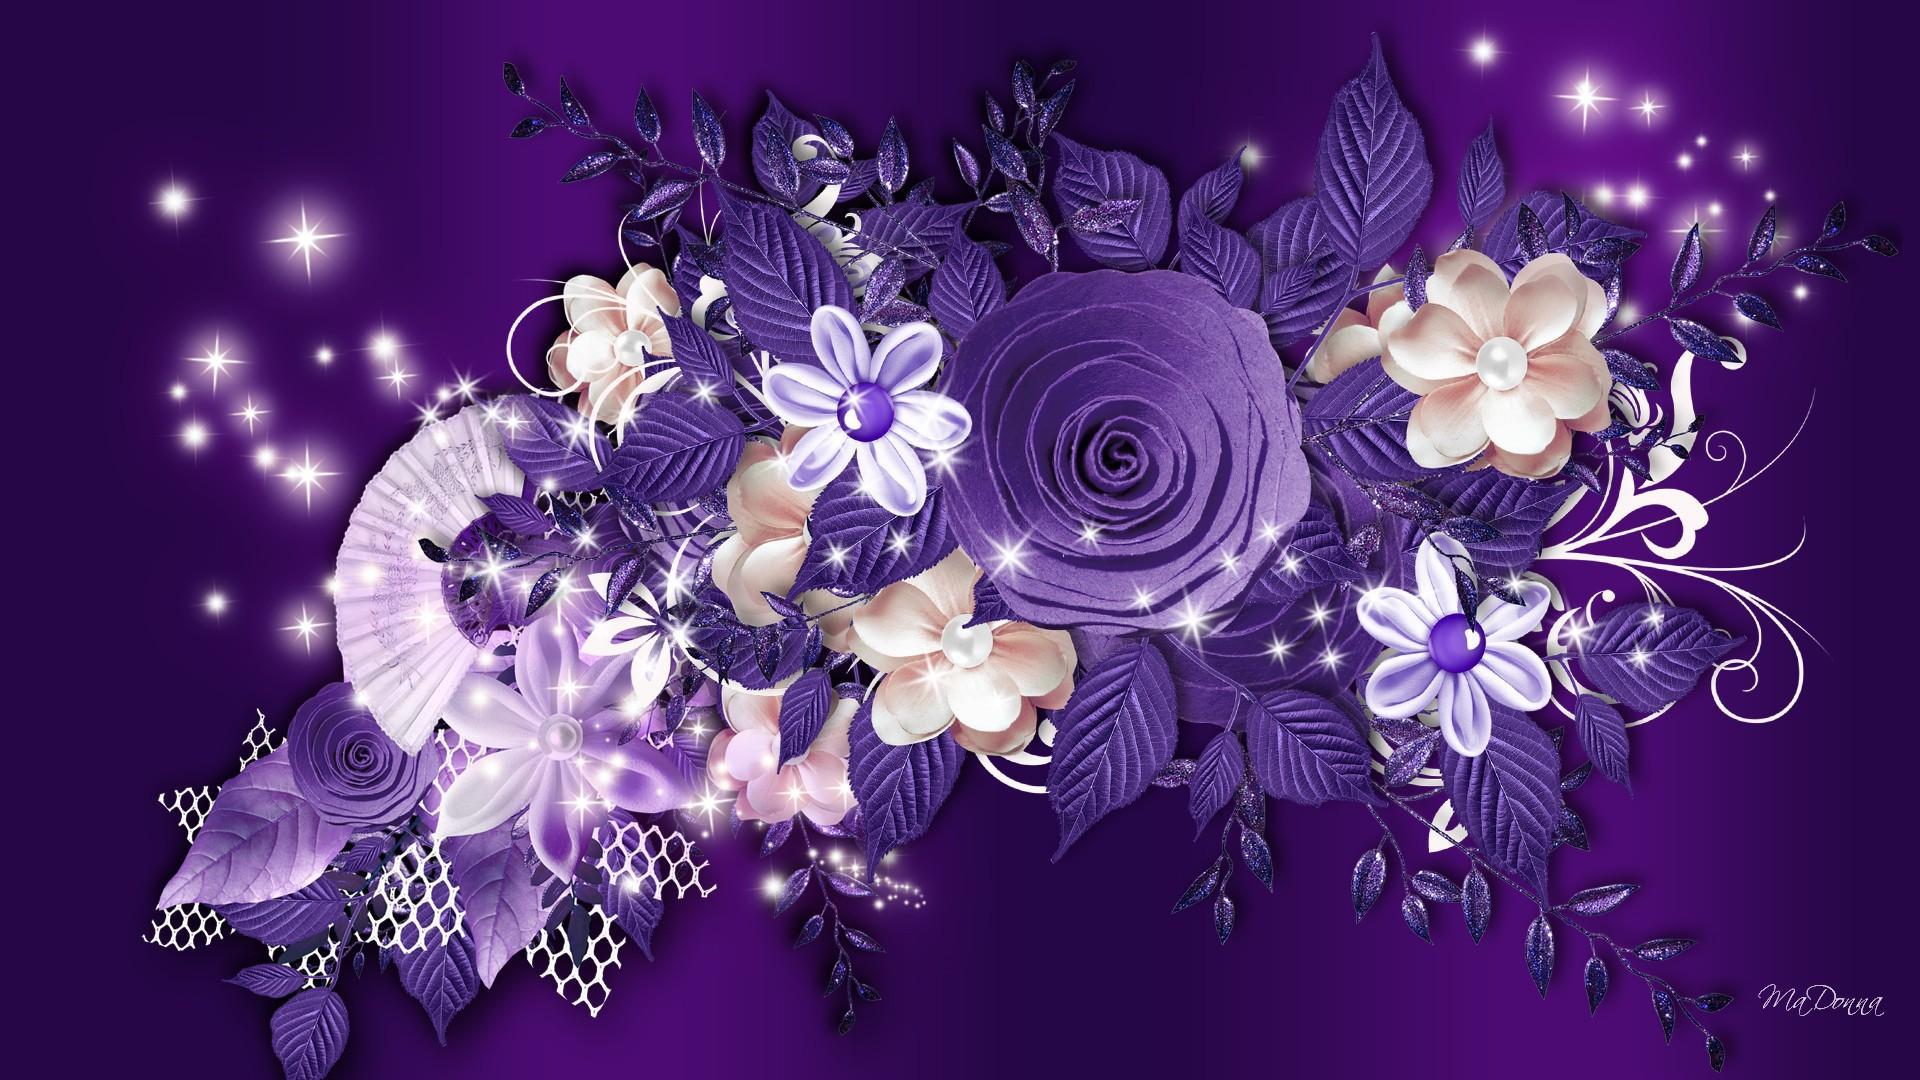 Purple Roses And Other Flowers On A Background